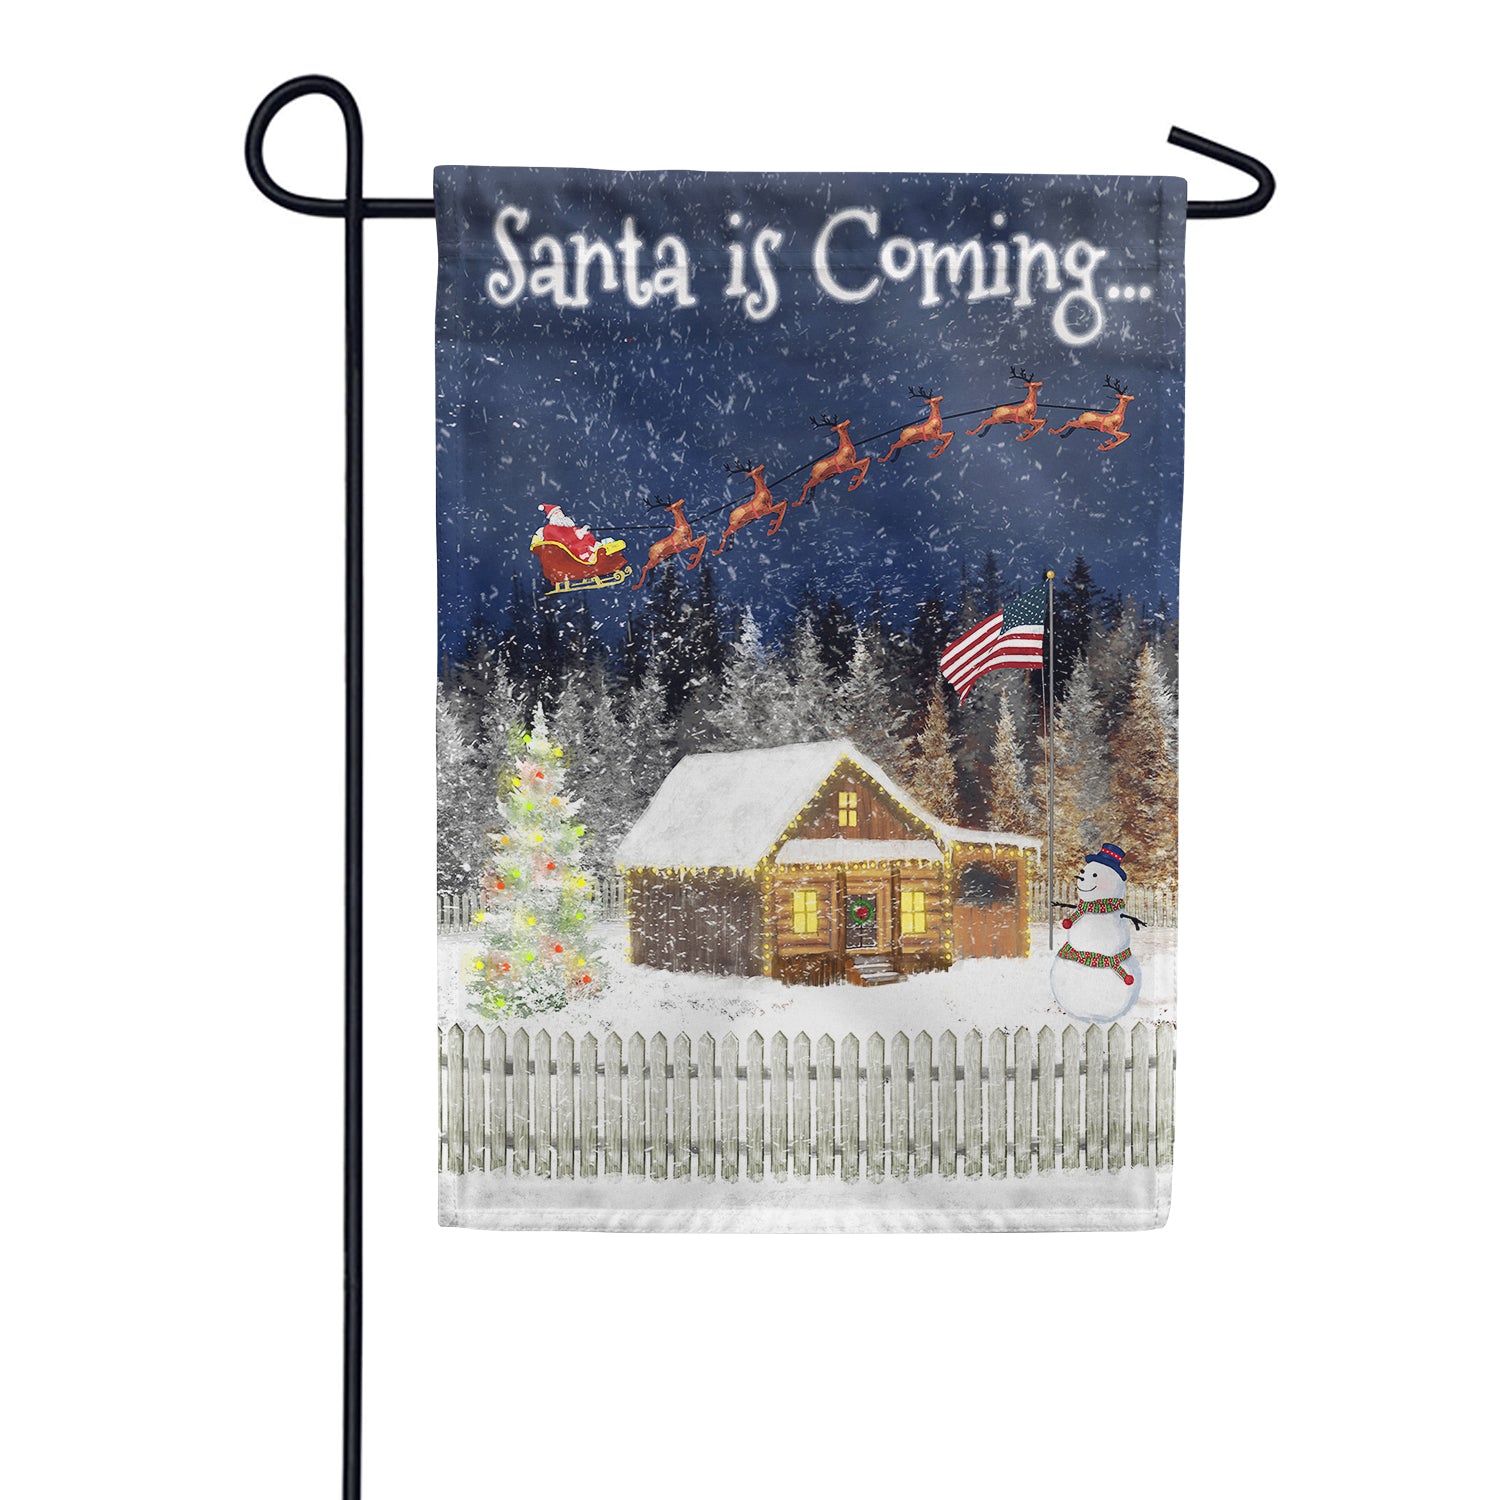 Santa is Coming Double Sided Garden Flag